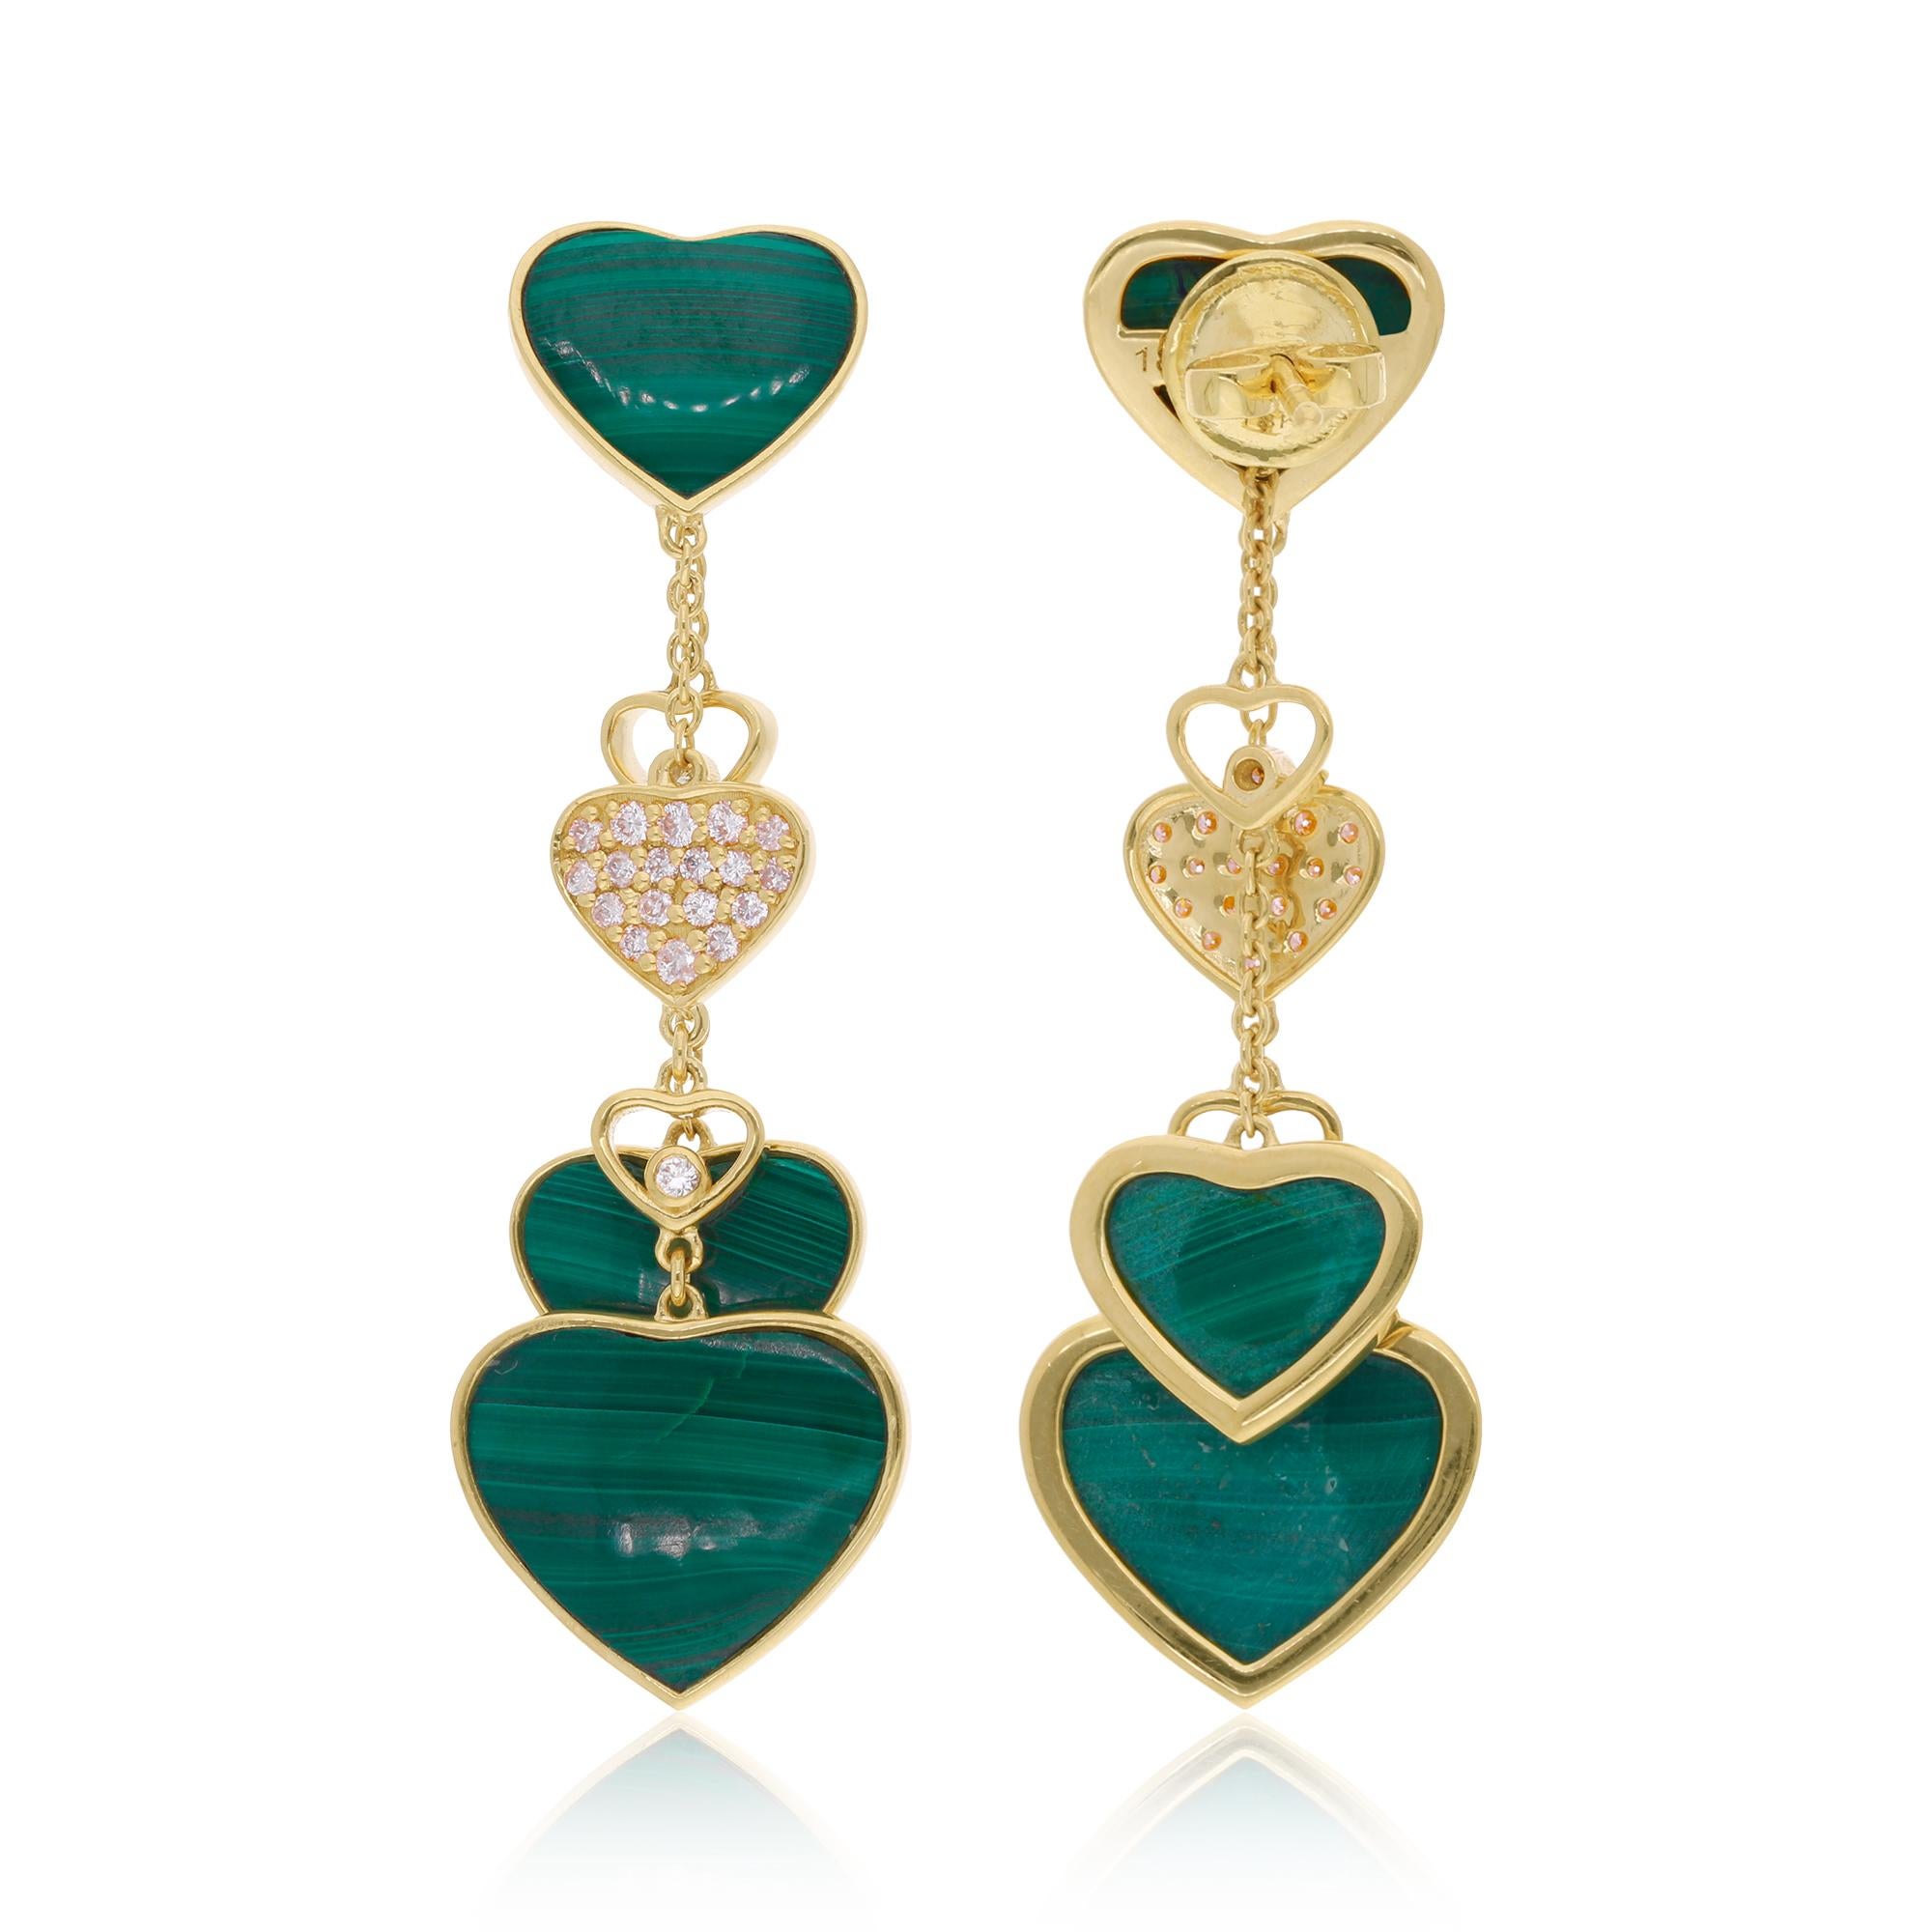 Item Code :- SEE-14638
Gross Wt. :- 11.14 gm
18k Yellow Gold Wt. :- 8.47 gm
Natural Diamond Wt. :- 0.37 Ct. ( AVERAGE DIAMOND CLARITY SI1-SI2 & COLOR H-I )
Malachite Wt. :- 13 Ct.
Earrings Size :- 47 mm approx.

✦ Sizing
.....................
We can